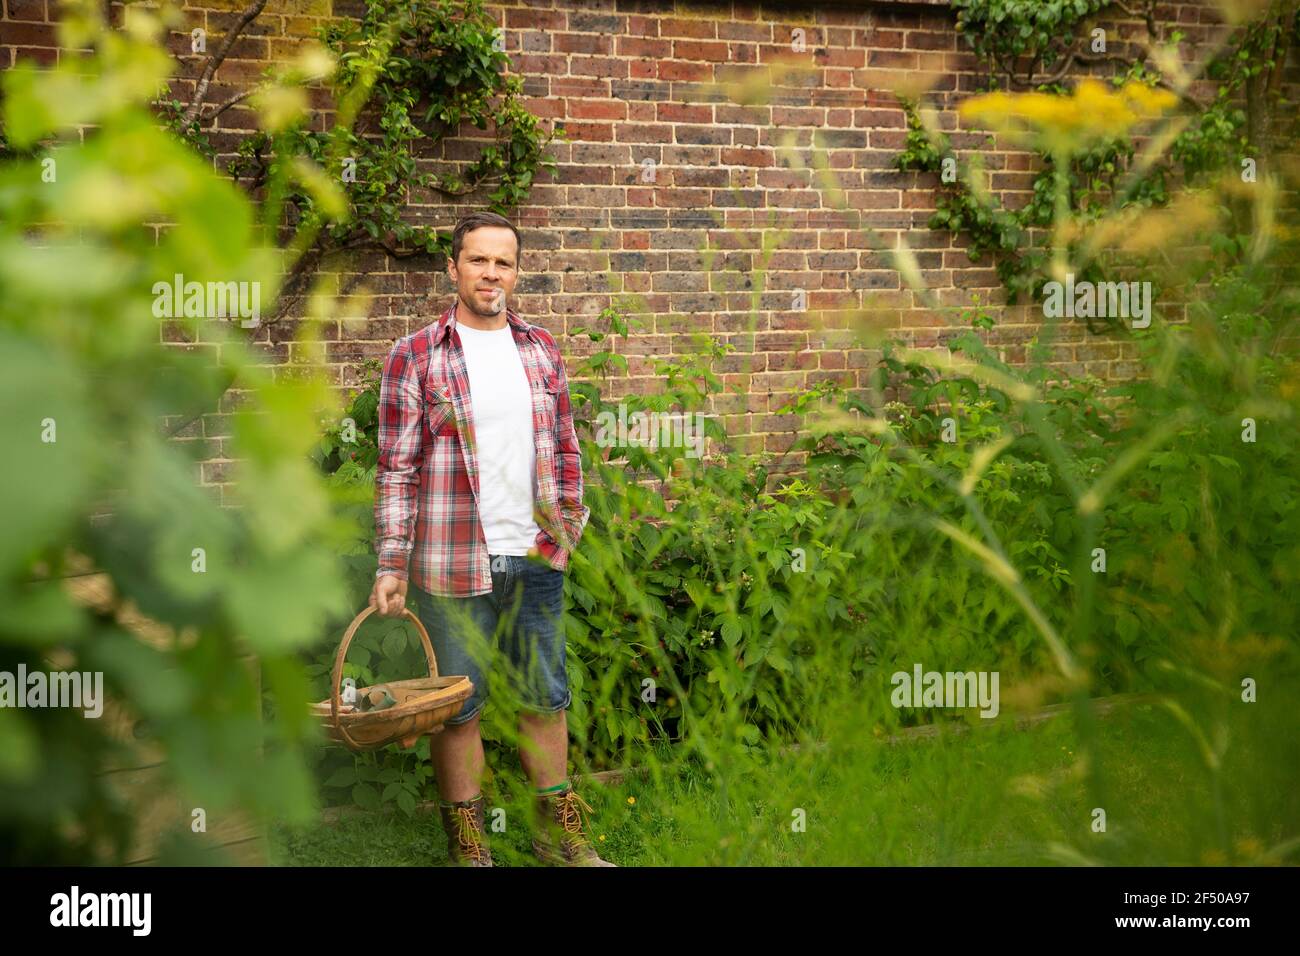 Portrait confident man with basket at brick wall in summer garden Stock Photo